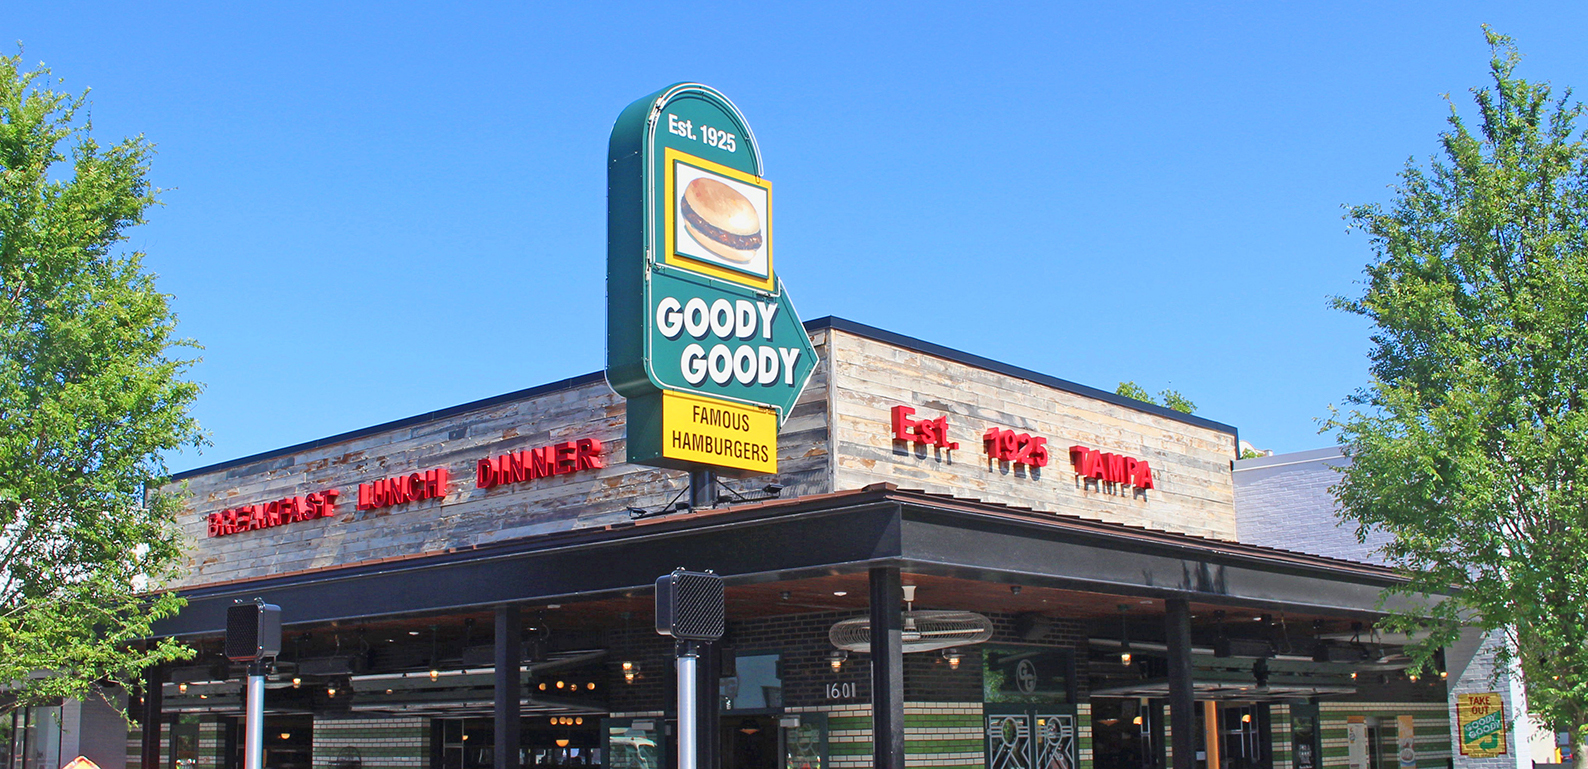 Outside of goody goody